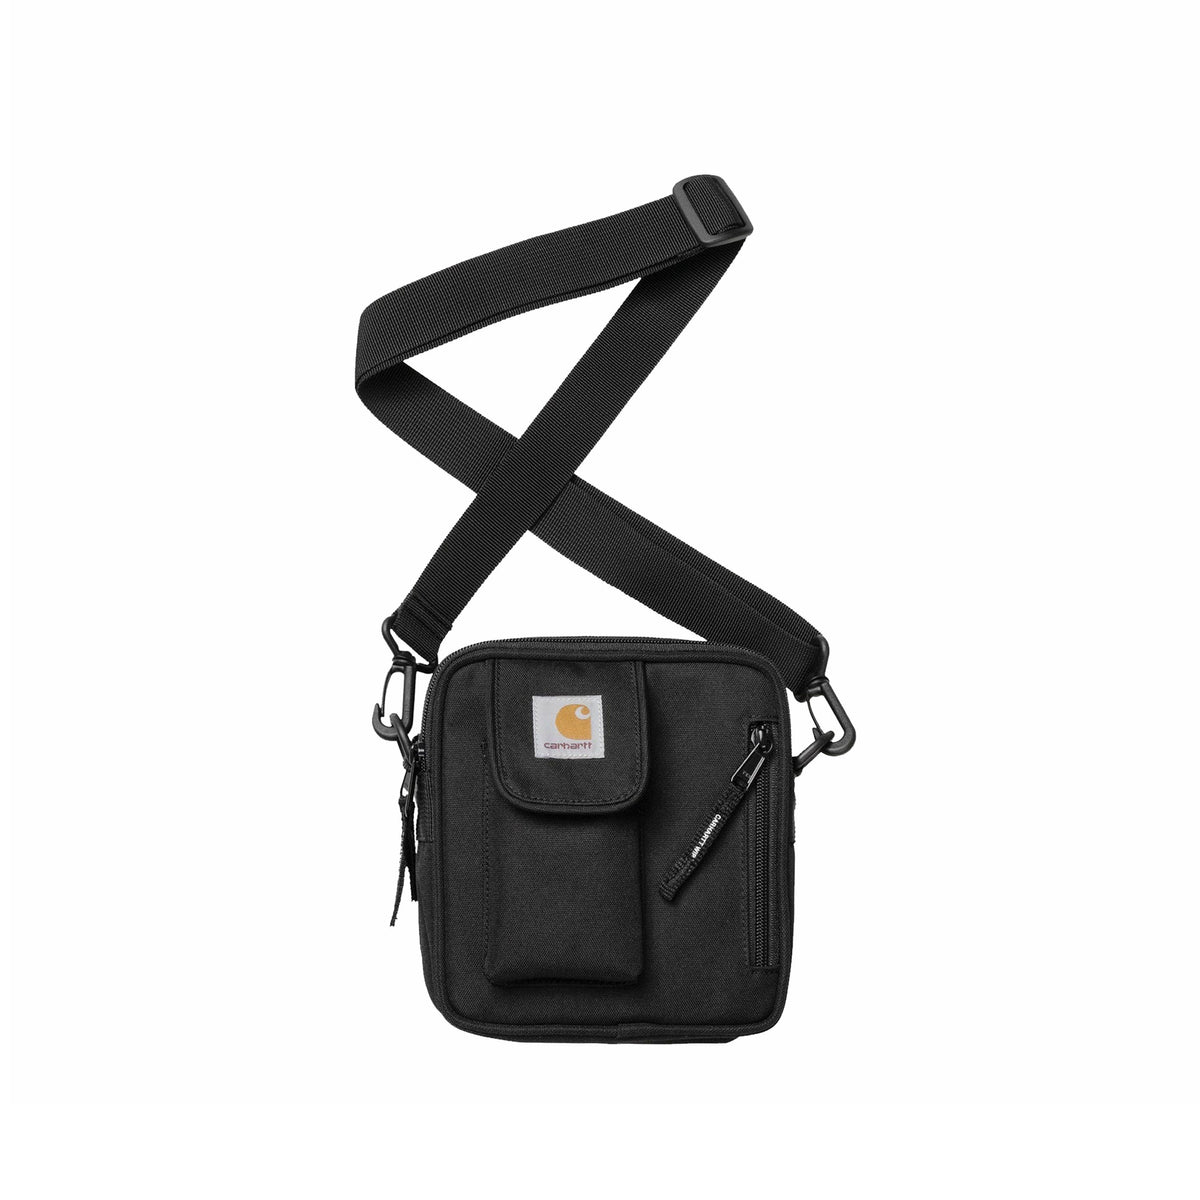 Essentials Bag Carhartt WIP The more you spend, the greater